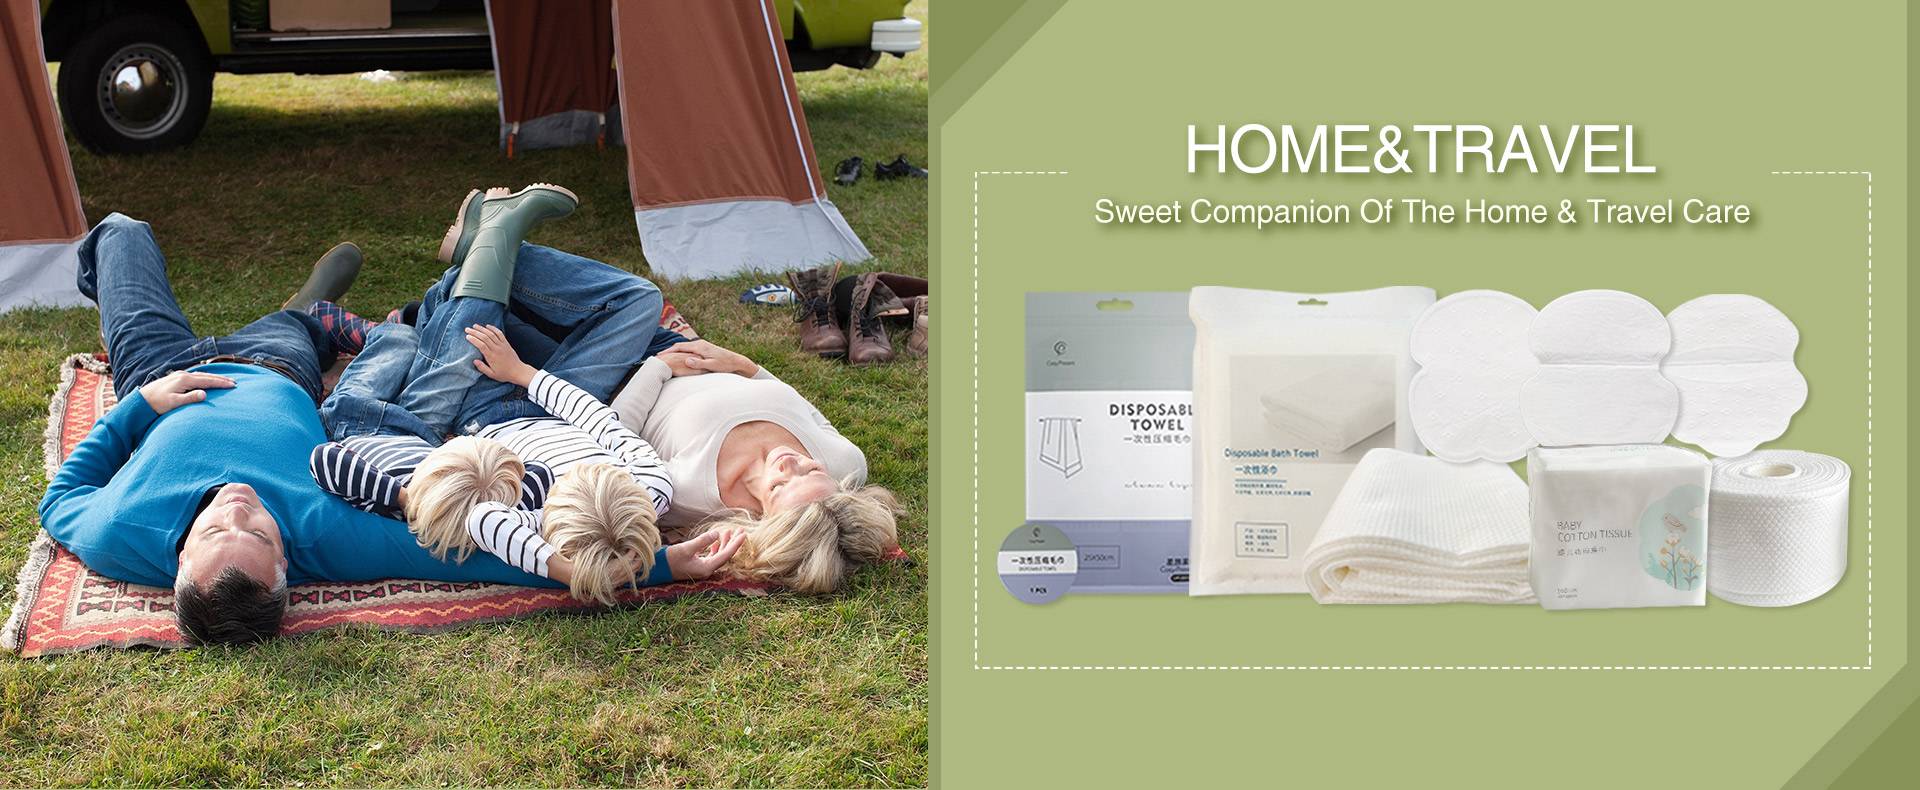 home and travel care products 